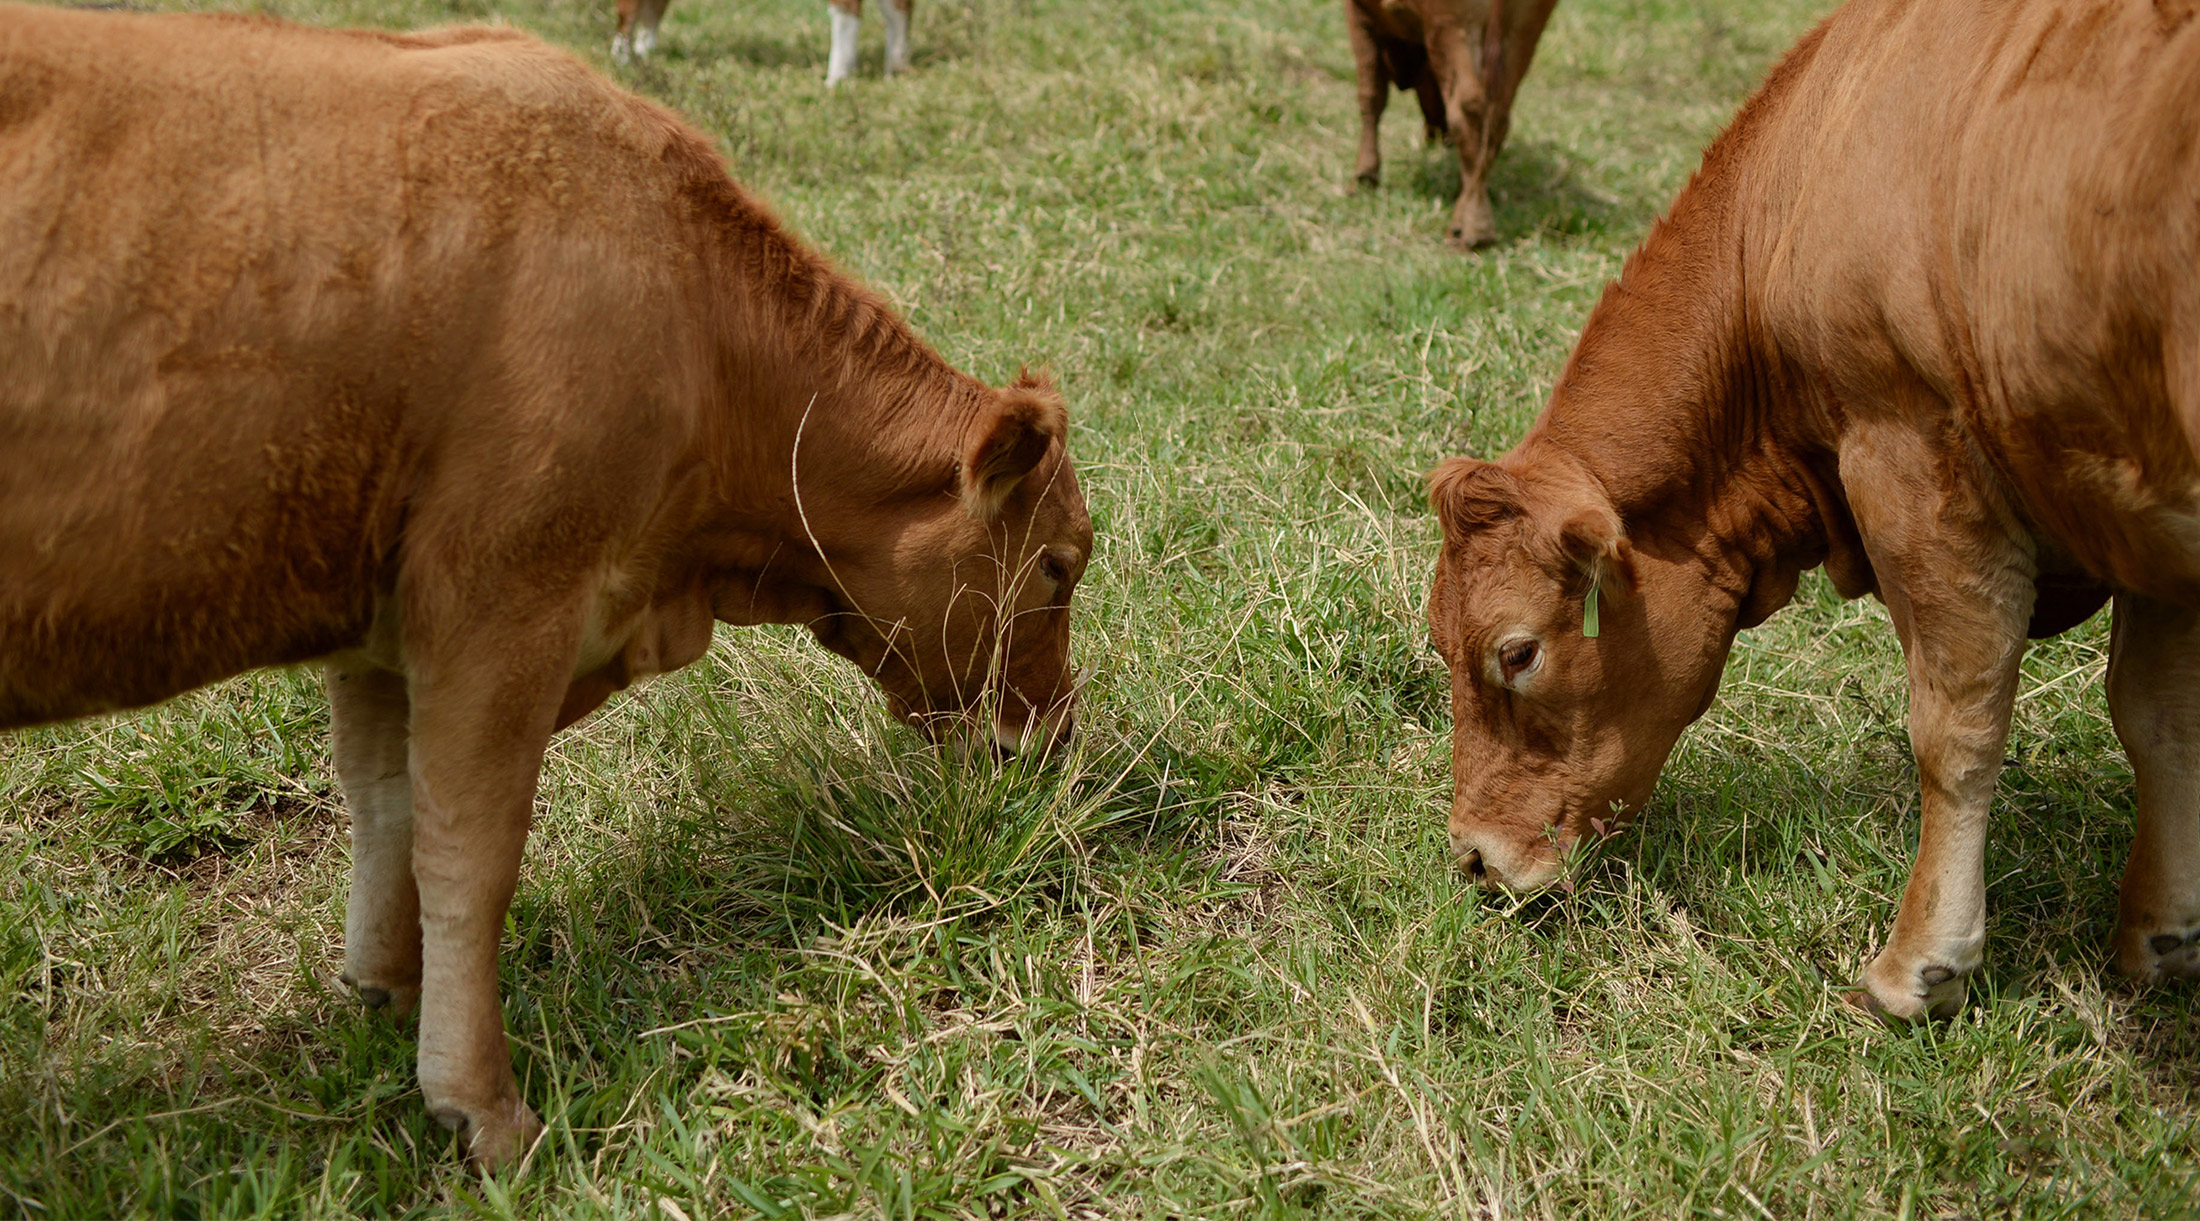 Most Grass-Fed Beef Labeled 'Product of U.S.A.' Is Imported